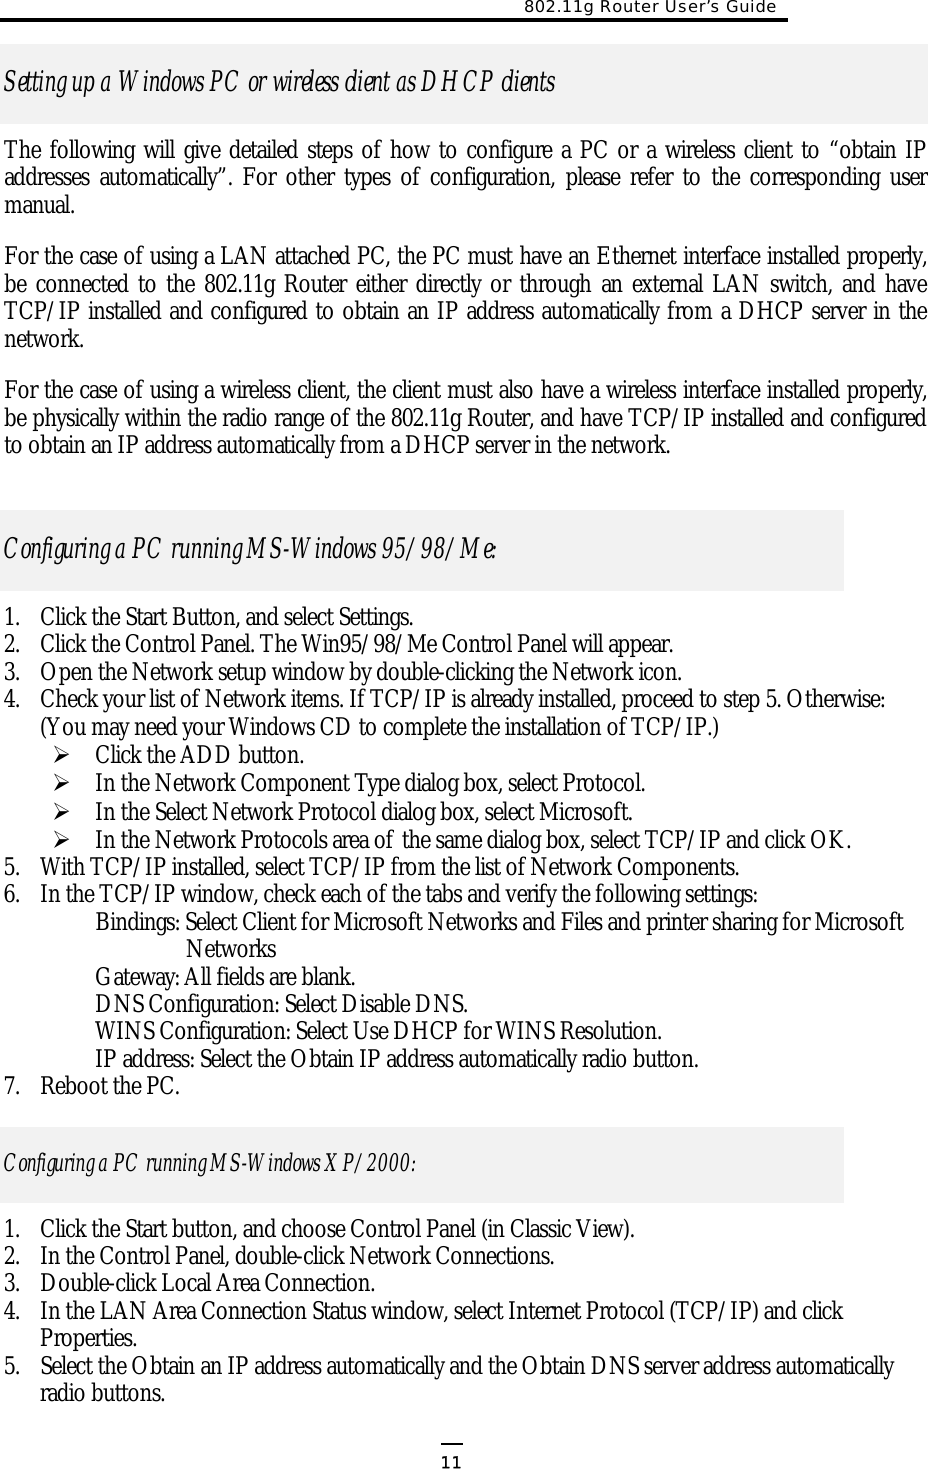 802.11g Router User’s Guide   11Setting up a Windows PC or wireless client as DHCP clients The following will give detailed steps of how to configure a PC or a wireless client to “obtain IP addresses automatically”. For other types of configuration, please refer to the corresponding user manual. For the case of using a LAN attached PC, the PC must have an Ethernet interface installed properly, be connected to the 802.11g Router either directly or through an external LAN switch, and have TCP/IP installed and configured to obtain an IP address automatically from a DHCP server in the network. For the case of using a wireless client, the client must also have a wireless interface installed properly, be physically within the radio range of the 802.11g Router, and have TCP/IP installed and configured to obtain an IP address automatically from a DHCP server in the network. Configuring a PC running MS-Windows 95/98/Me: 1.  Click the Start Button, and select Settings. 2.  Click the Control Panel. The Win95/98/Me Control Panel will appear. 3.  Open the Network setup window by double-clicking the Network icon. 4.  Check your list of Network items. If TCP/IP is already installed, proceed to step 5. Otherwise: (You may need your Windows CD to complete the installation of TCP/IP.)  Click the ADD button.  In the Network Component Type dialog box, select Protocol.  In the Select Network Protocol dialog box, select Microsoft.  In the Network Protocols area of the same dialog box, select TCP/IP and click OK.  5.  With TCP/IP installed, select TCP/IP from the list of Network Components. 6.  In the TCP/IP window, check each of the tabs and verify the following settings: Bindings: Select Client for Microsoft Networks and Files and printer sharing for Microsoft Networks Gateway: All fields are blank. DNS Configuration: Select Disable DNS. WINS Configuration: Select Use DHCP for WINS Resolution. IP address: Select the Obtain IP address automatically radio button. 7.  Reboot the PC. Configuring a PC running MS-Windows XP/2000: 1.  Click the Start button, and choose Control Panel (in Classic View).  2.  In the Control Panel, double-click Network Connections. 3.  Double-click Local Area Connection.  4.  In the LAN Area Connection Status window, select Internet Protocol (TCP/IP) and click Properties. 5.  Select the Obtain an IP address automatically and the Obtain DNS server address automatically radio buttons. 